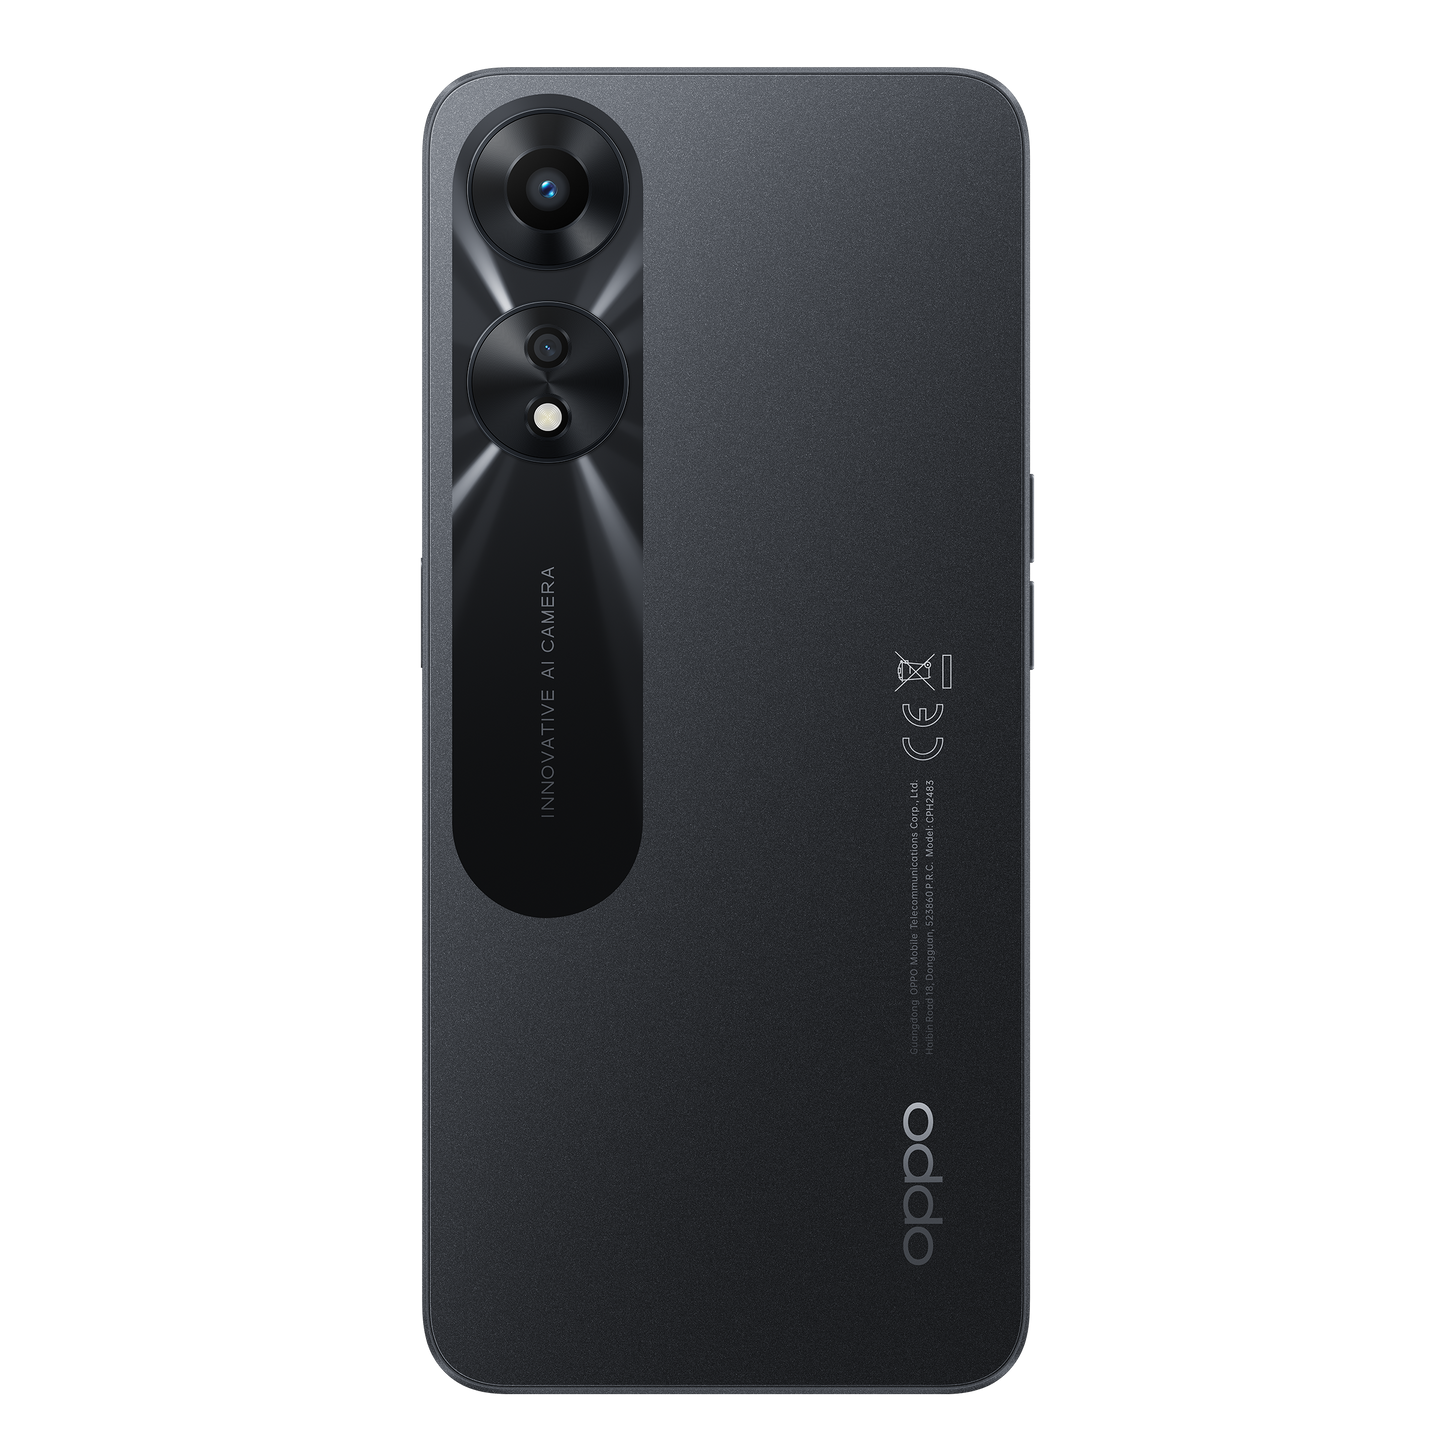 Buy XOVO Back Cover for Oppo A78 5G, OPPO A78 5G (Black, Dual